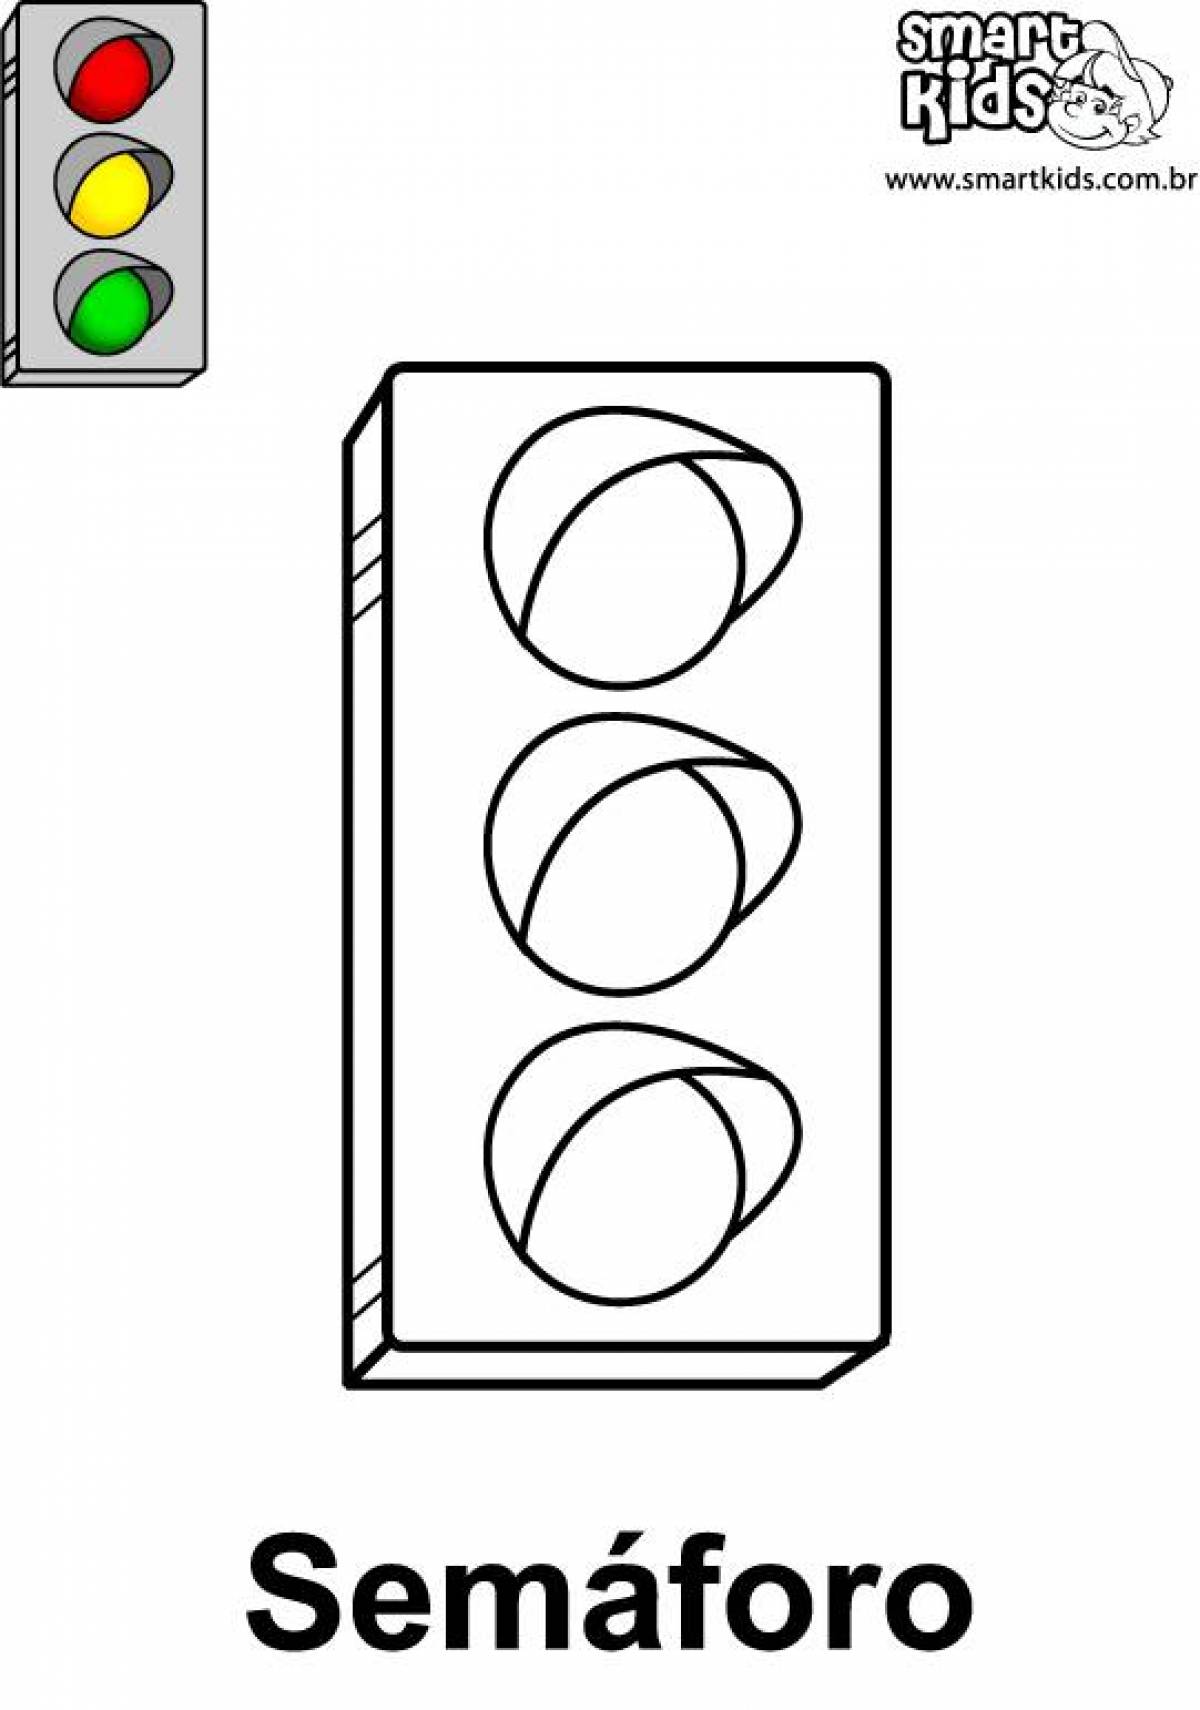 Adorable traffic light coloring page for 3-4 year olds